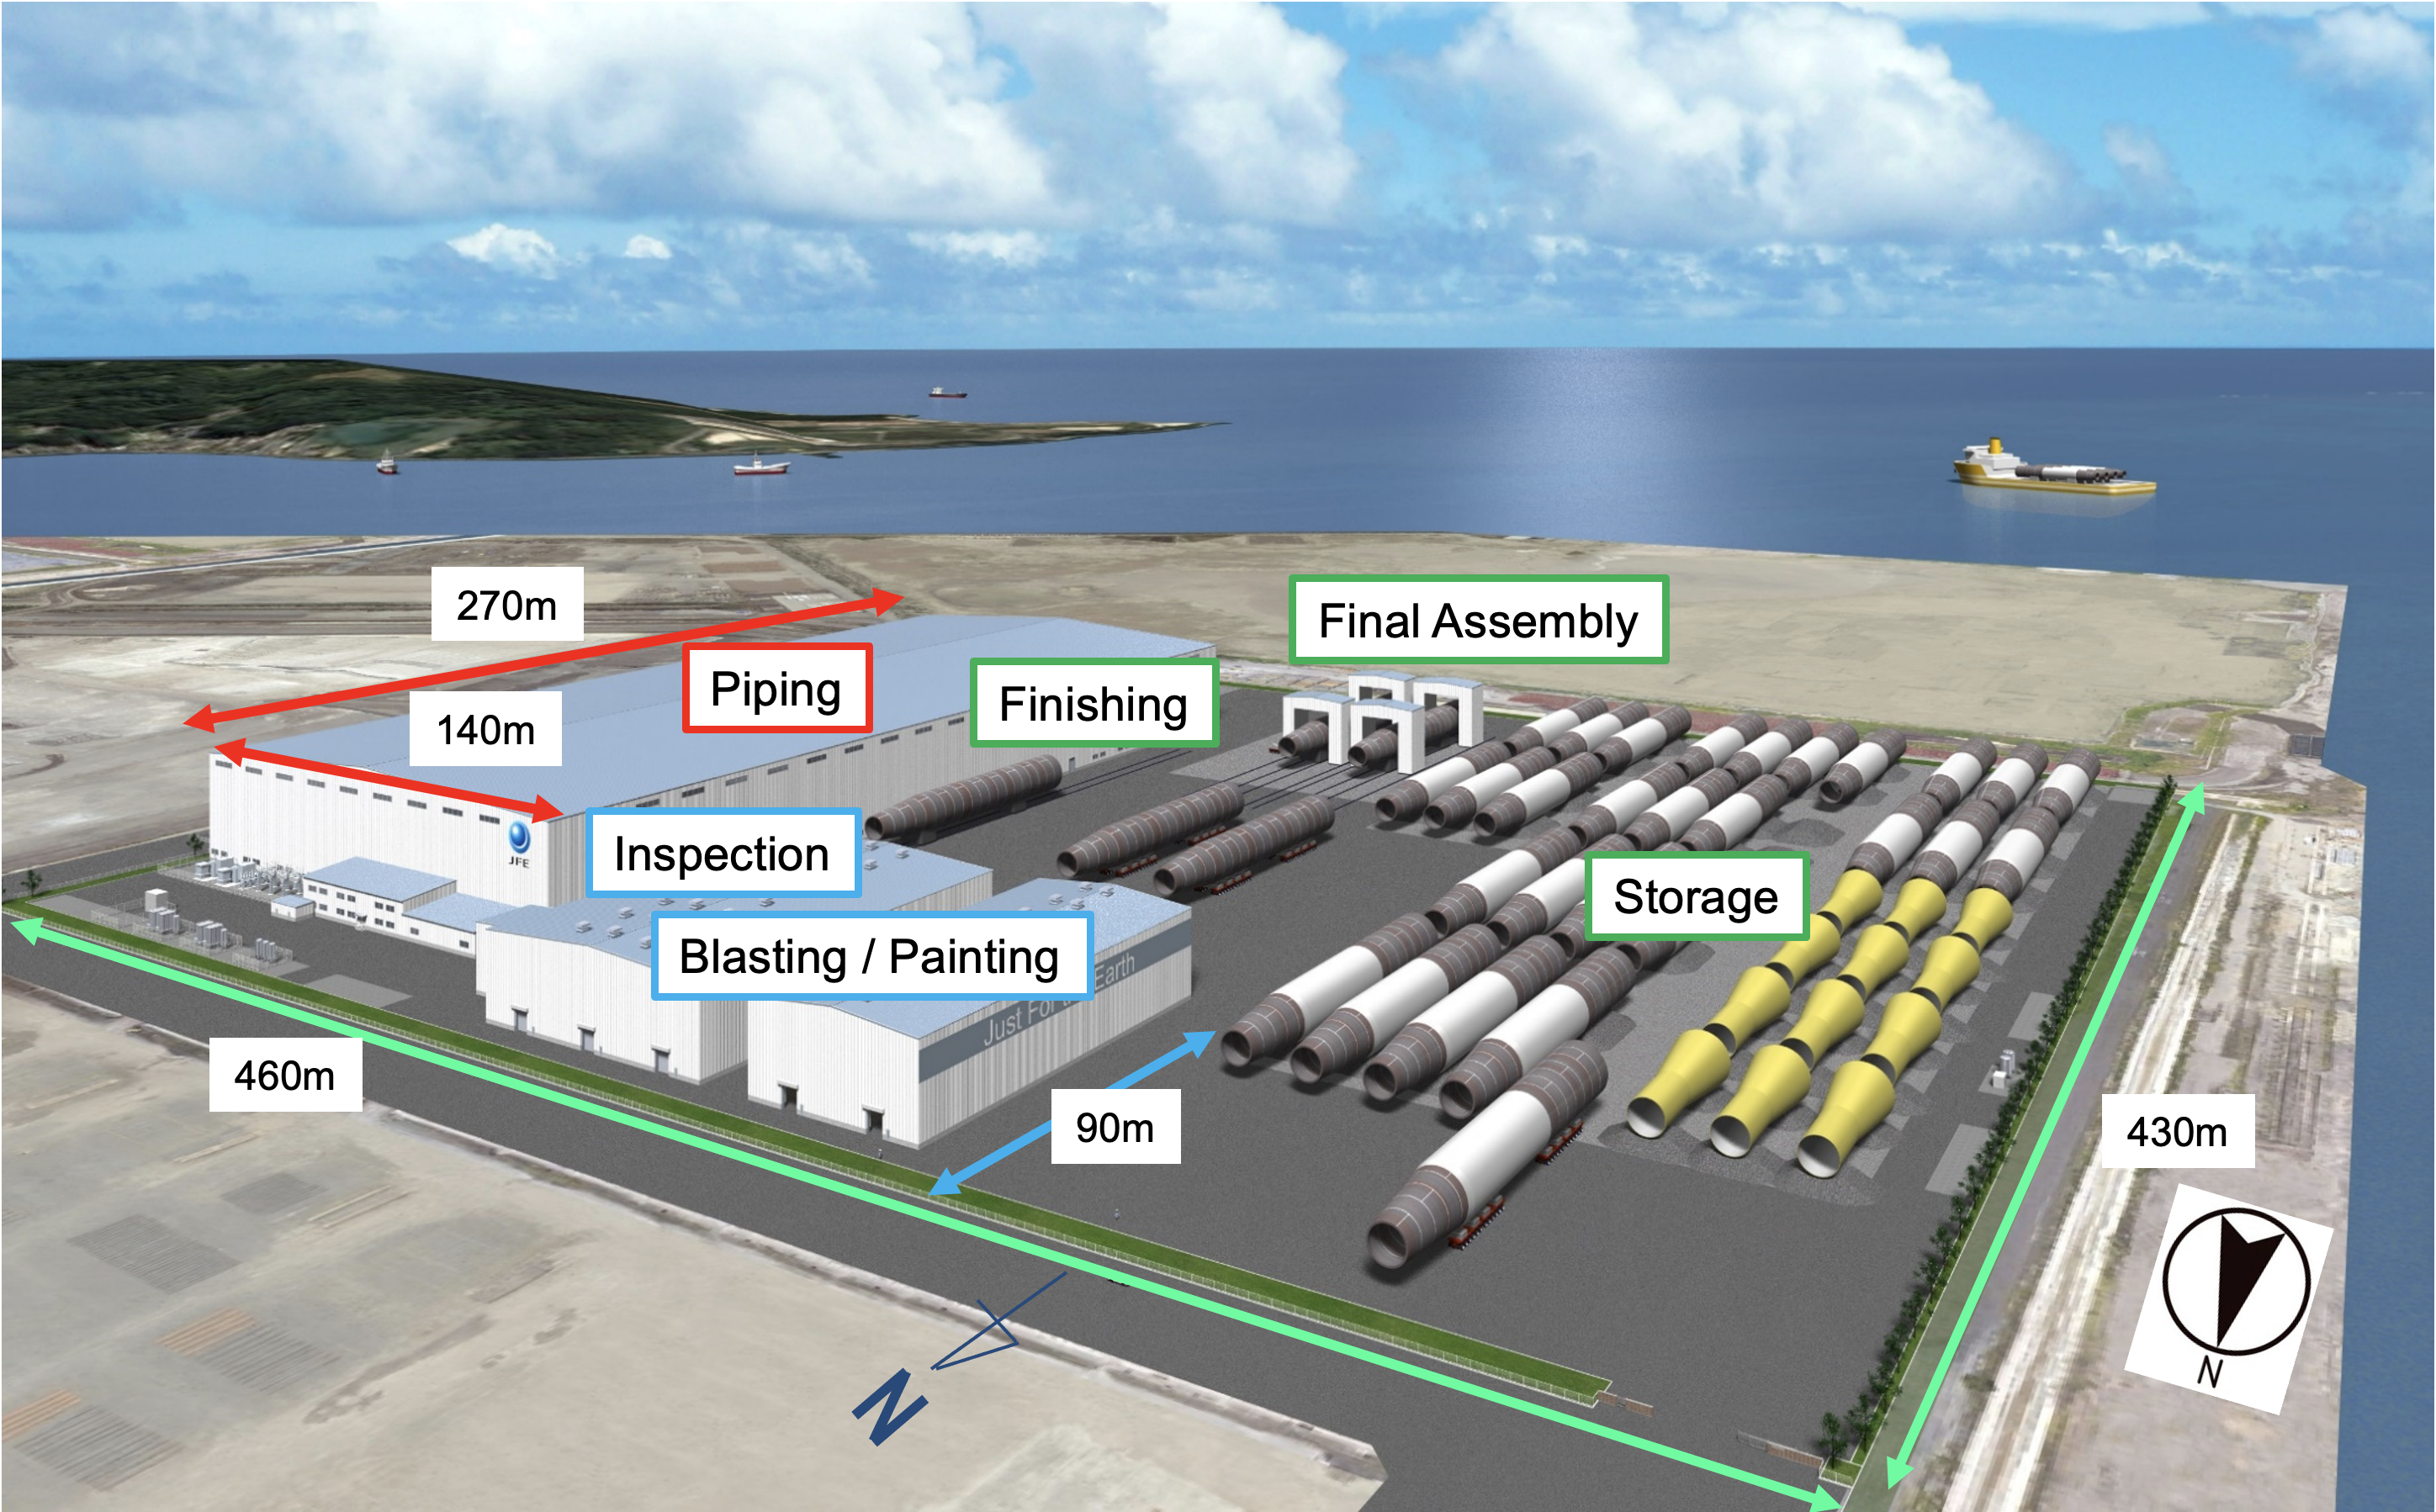 Overview of New Monopile Manufacturing Plant (Kasaoka)